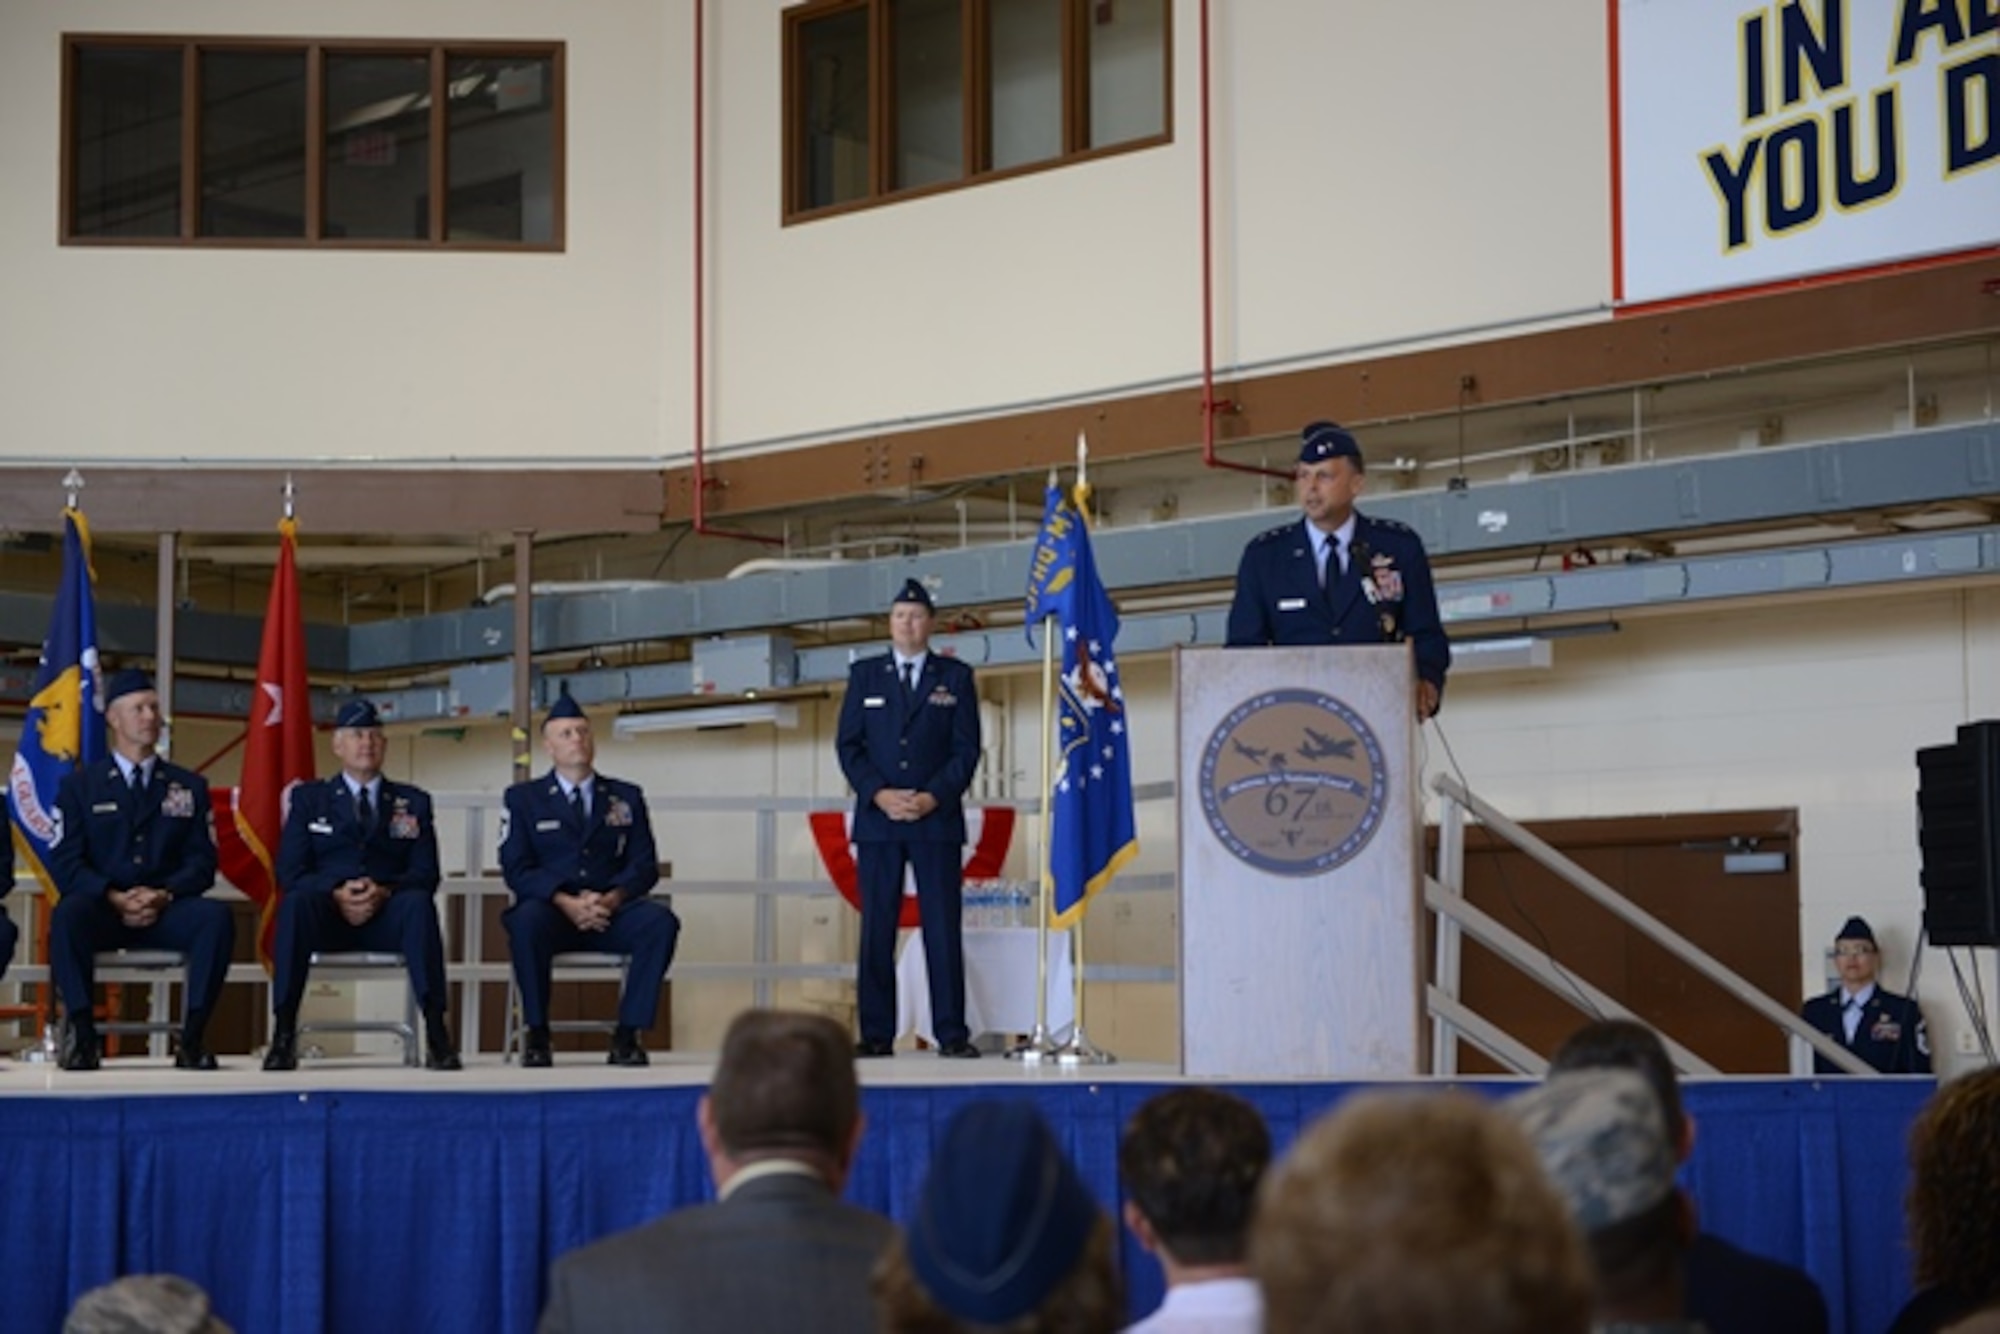 Maj. Gen. Scott Hanson, Director of Operations Air Mobility Command, speaks during a change of mission ceremony at the Montana Air National Guard May 31.  The wing officially changed from a fighter wing to an airlift wing on March 1. (U.S. Air Force photo/Senior Airman Katrina Heikkinen)